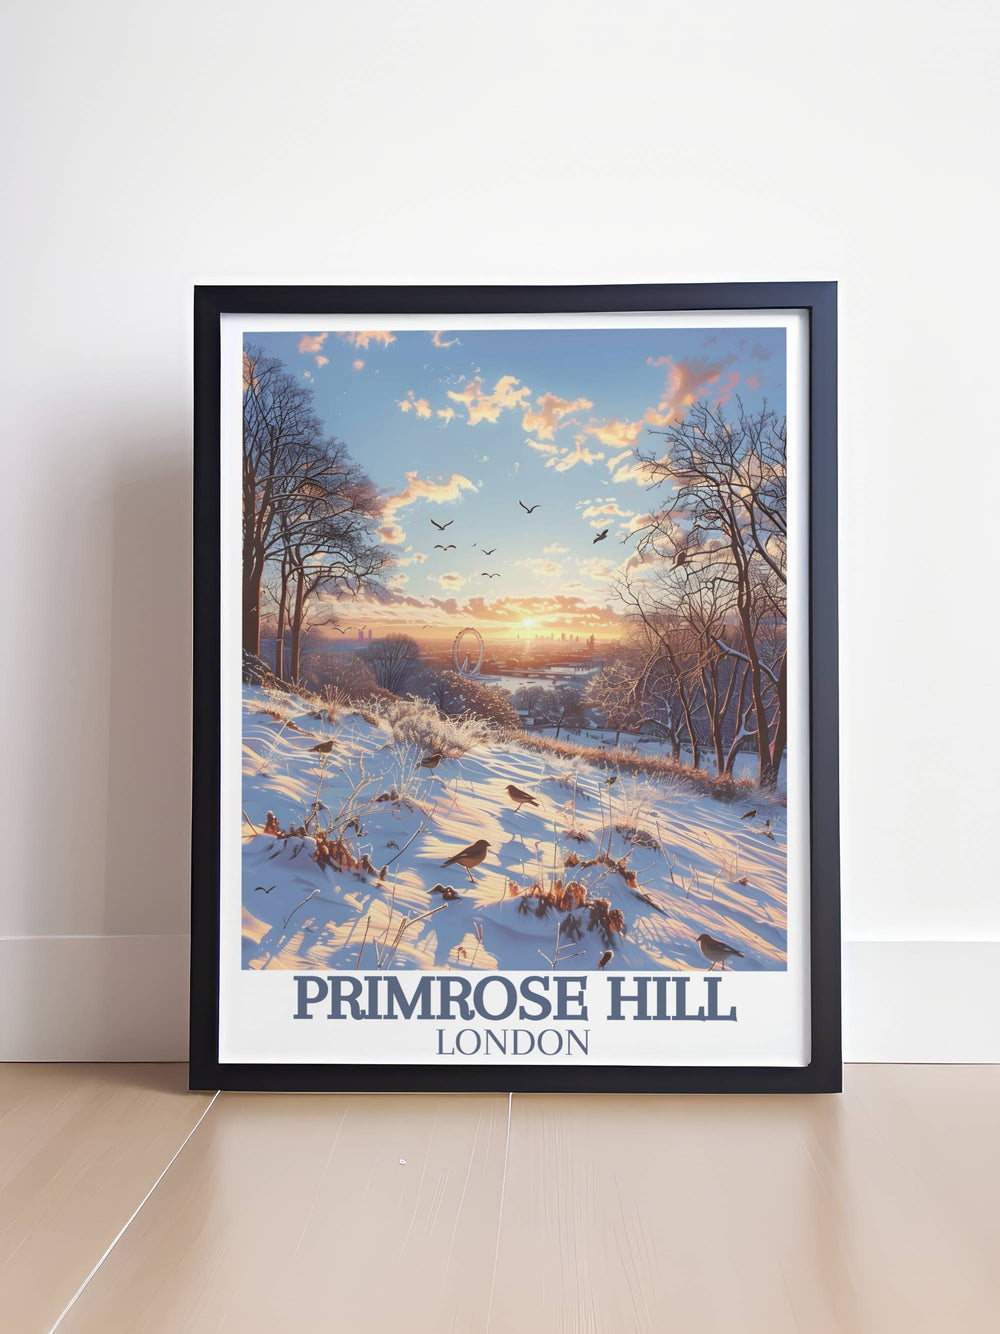 Experience the elegance of Primrose Hill with our Framed Art collection, showcasing stunning views and peaceful landscapes.